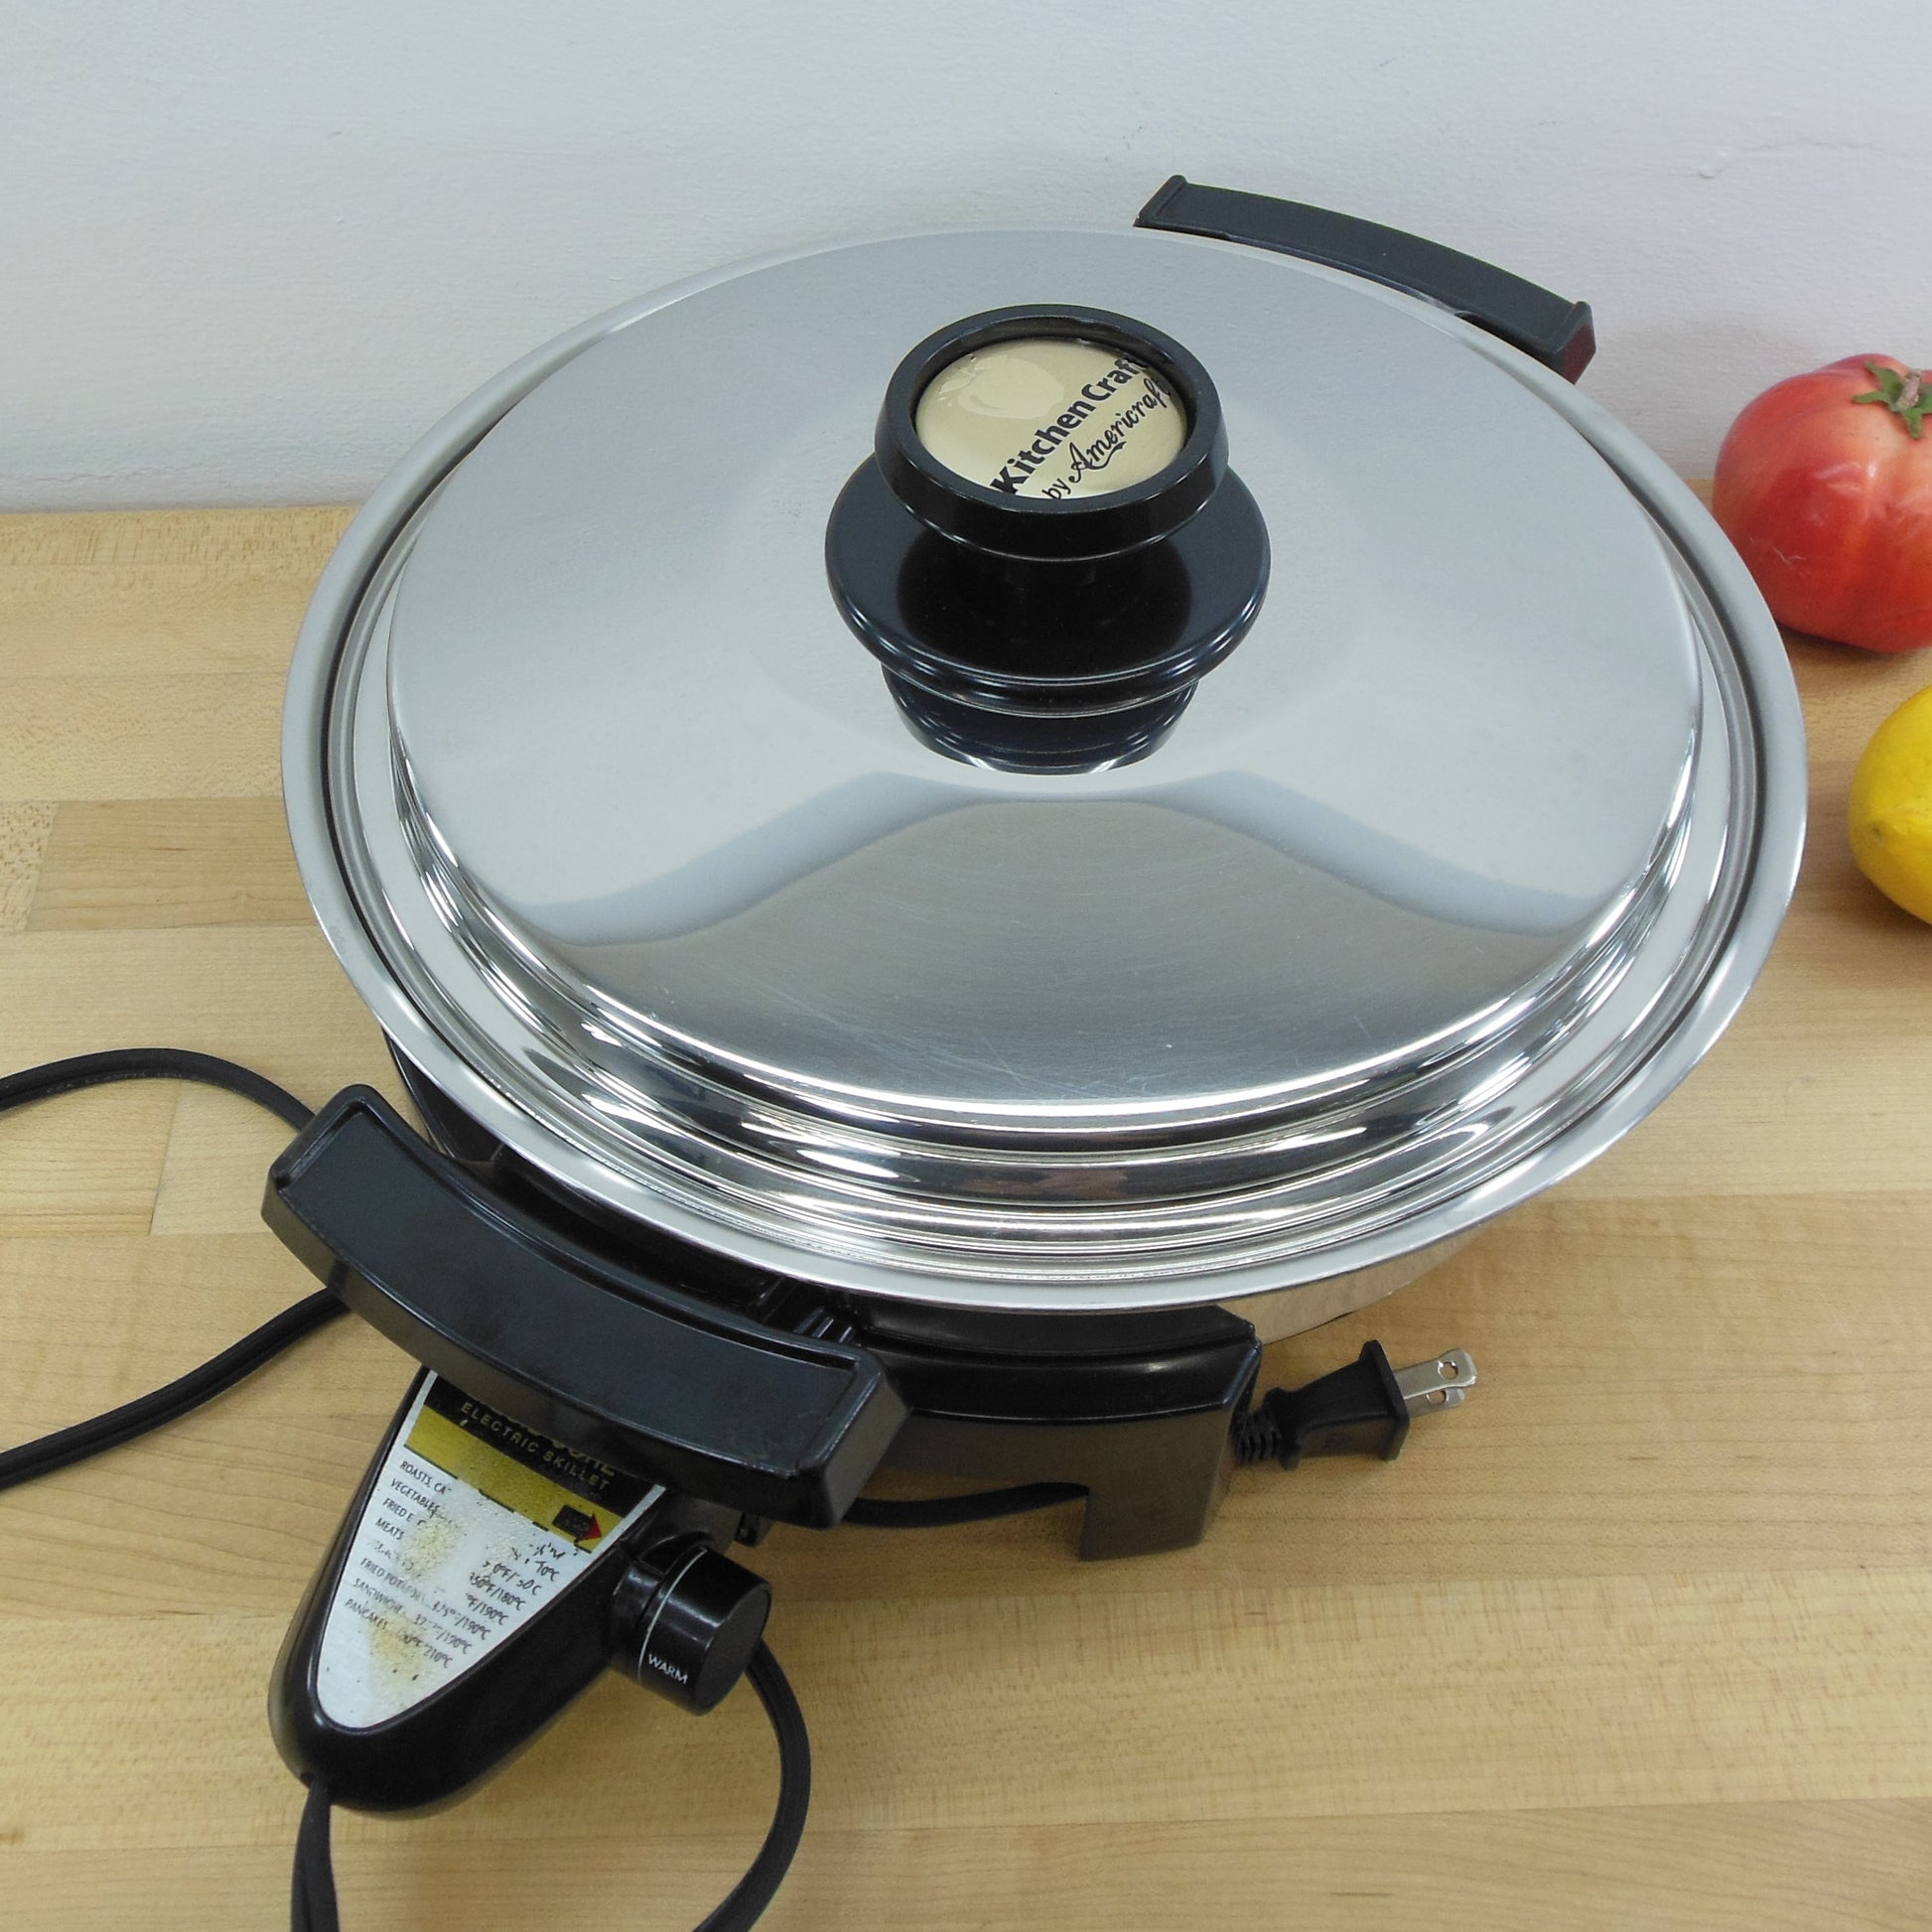 Kitchen Craft by Americraft USA Liquid Core 11" Stainless Electric Skillet Vintage 2008